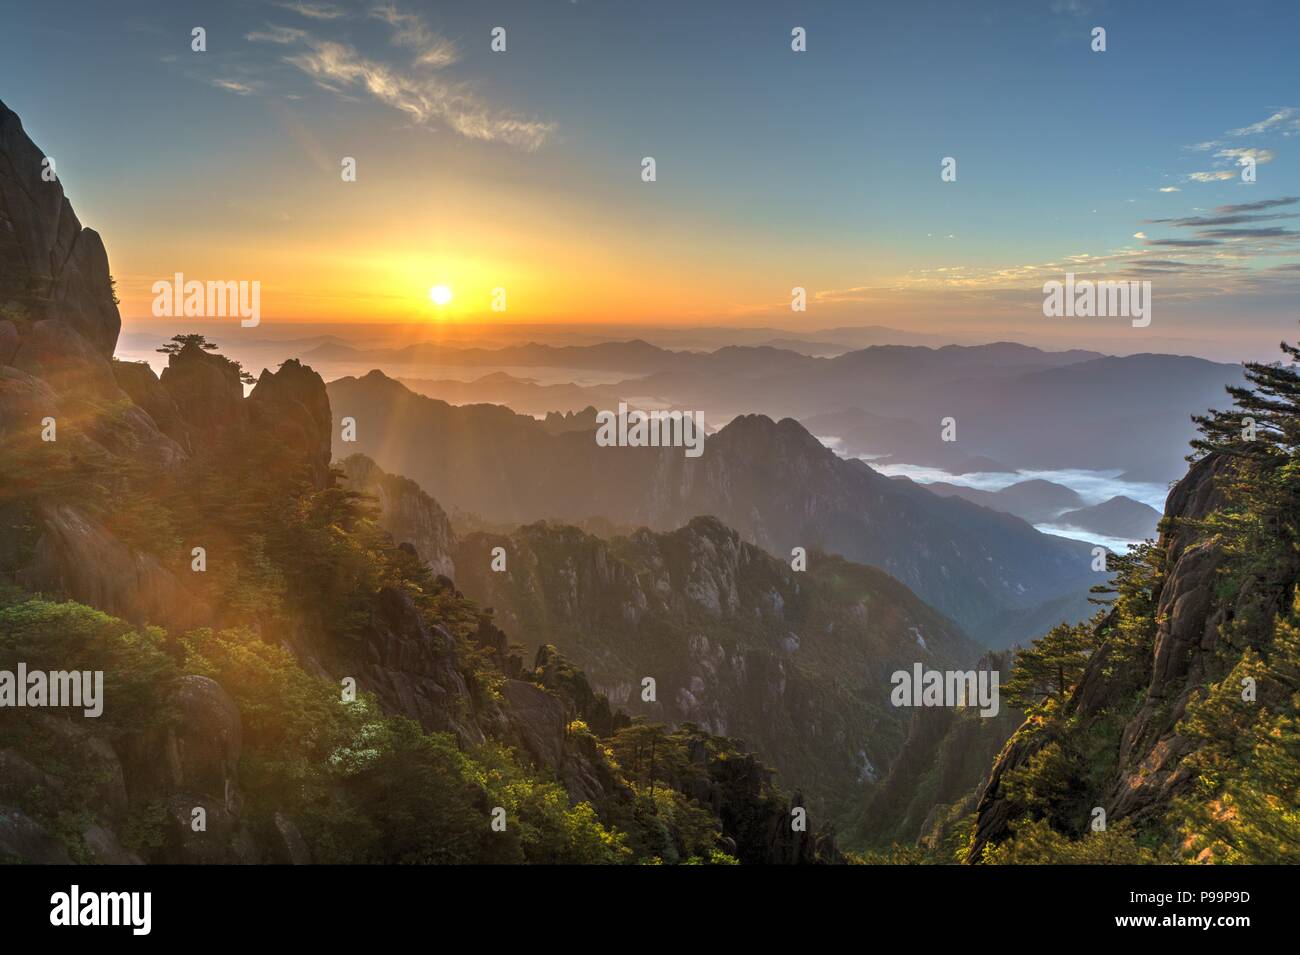 Colourful sunrise over sea of clouds at one of the peaks of Huangshan mountain range in southern Anhui province in eastern China. Stock Photo